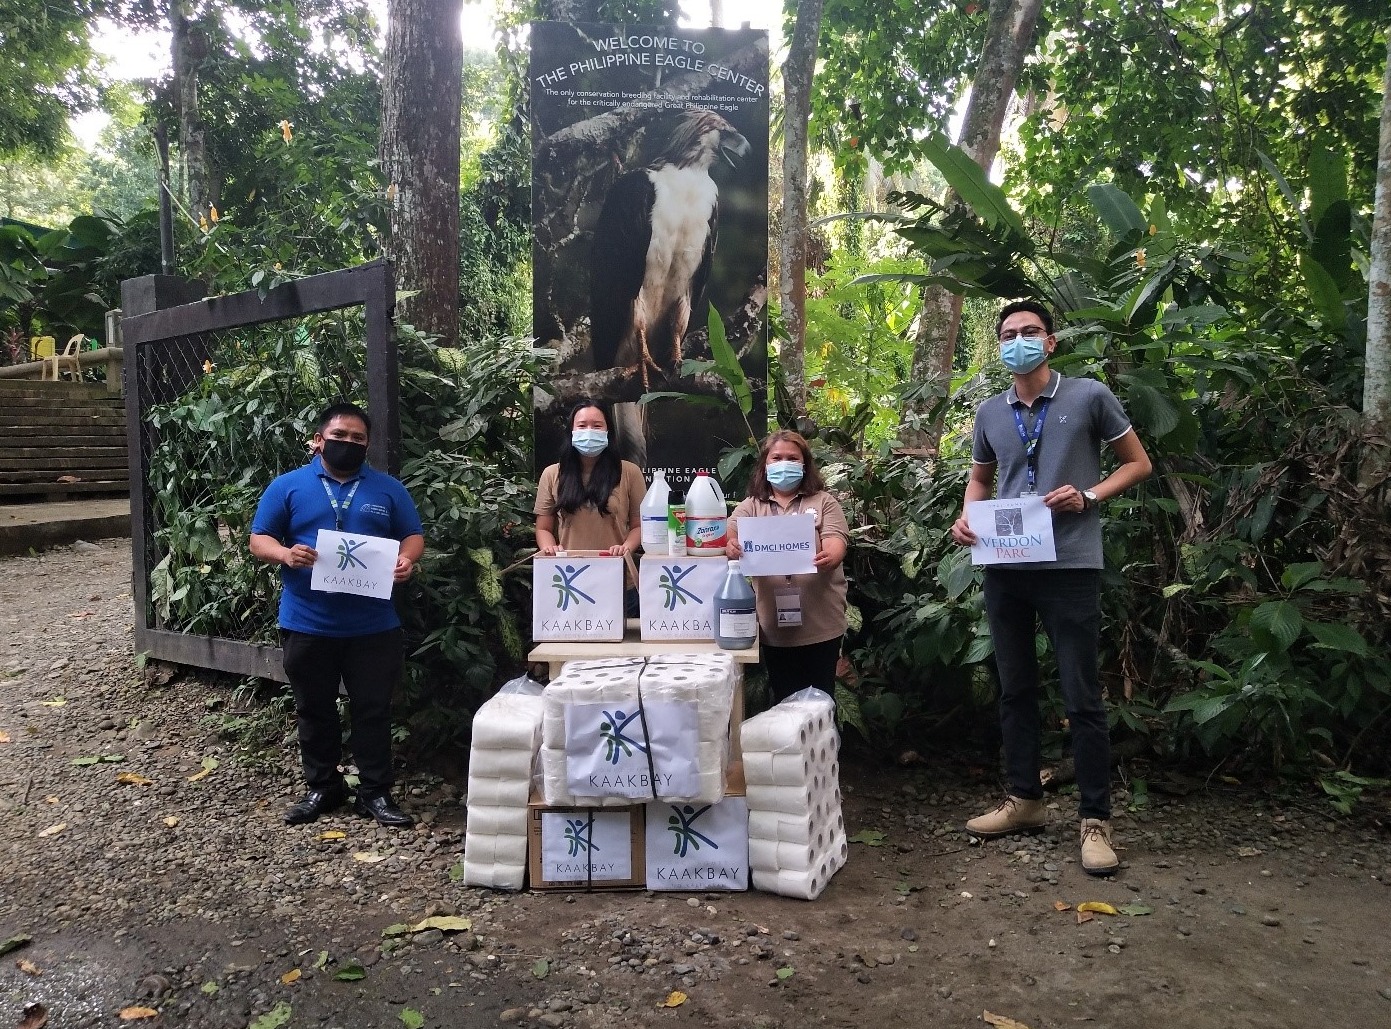 DMCI Homes and its Davao project, Verdon Parc, donate boxes of maintenance and quarantine supplies to the Philippine Eagle Foundation in support of the conservation mission amid the COVID-19 pandemic.